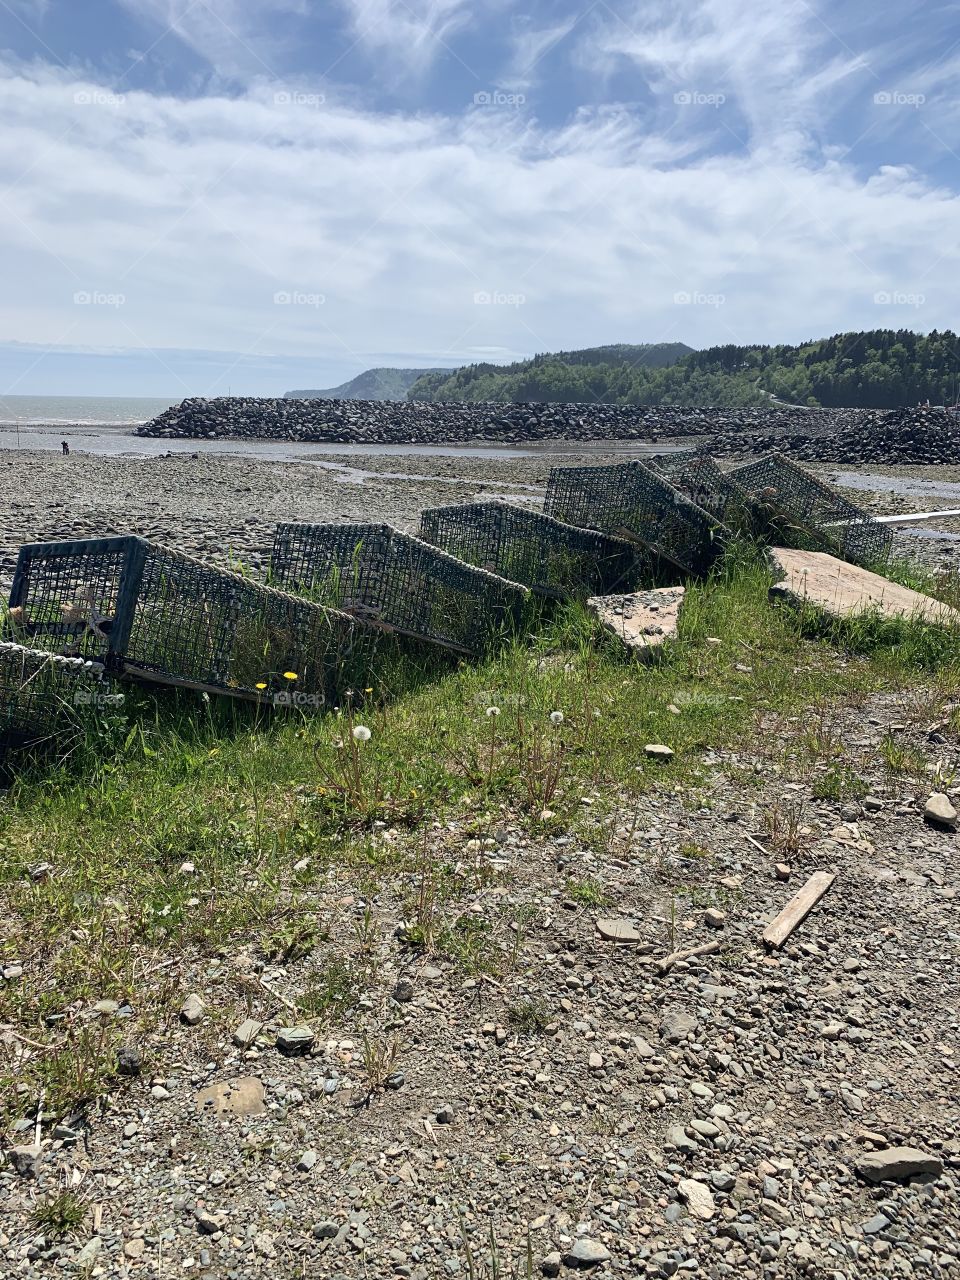 The best part of summer is being able to explore places you’ve never been. Lobster traps all lined up just off the coast of the Bay of Fundy. Go visit a small town called Alma at the Fundy National Park, you won’t regret it.